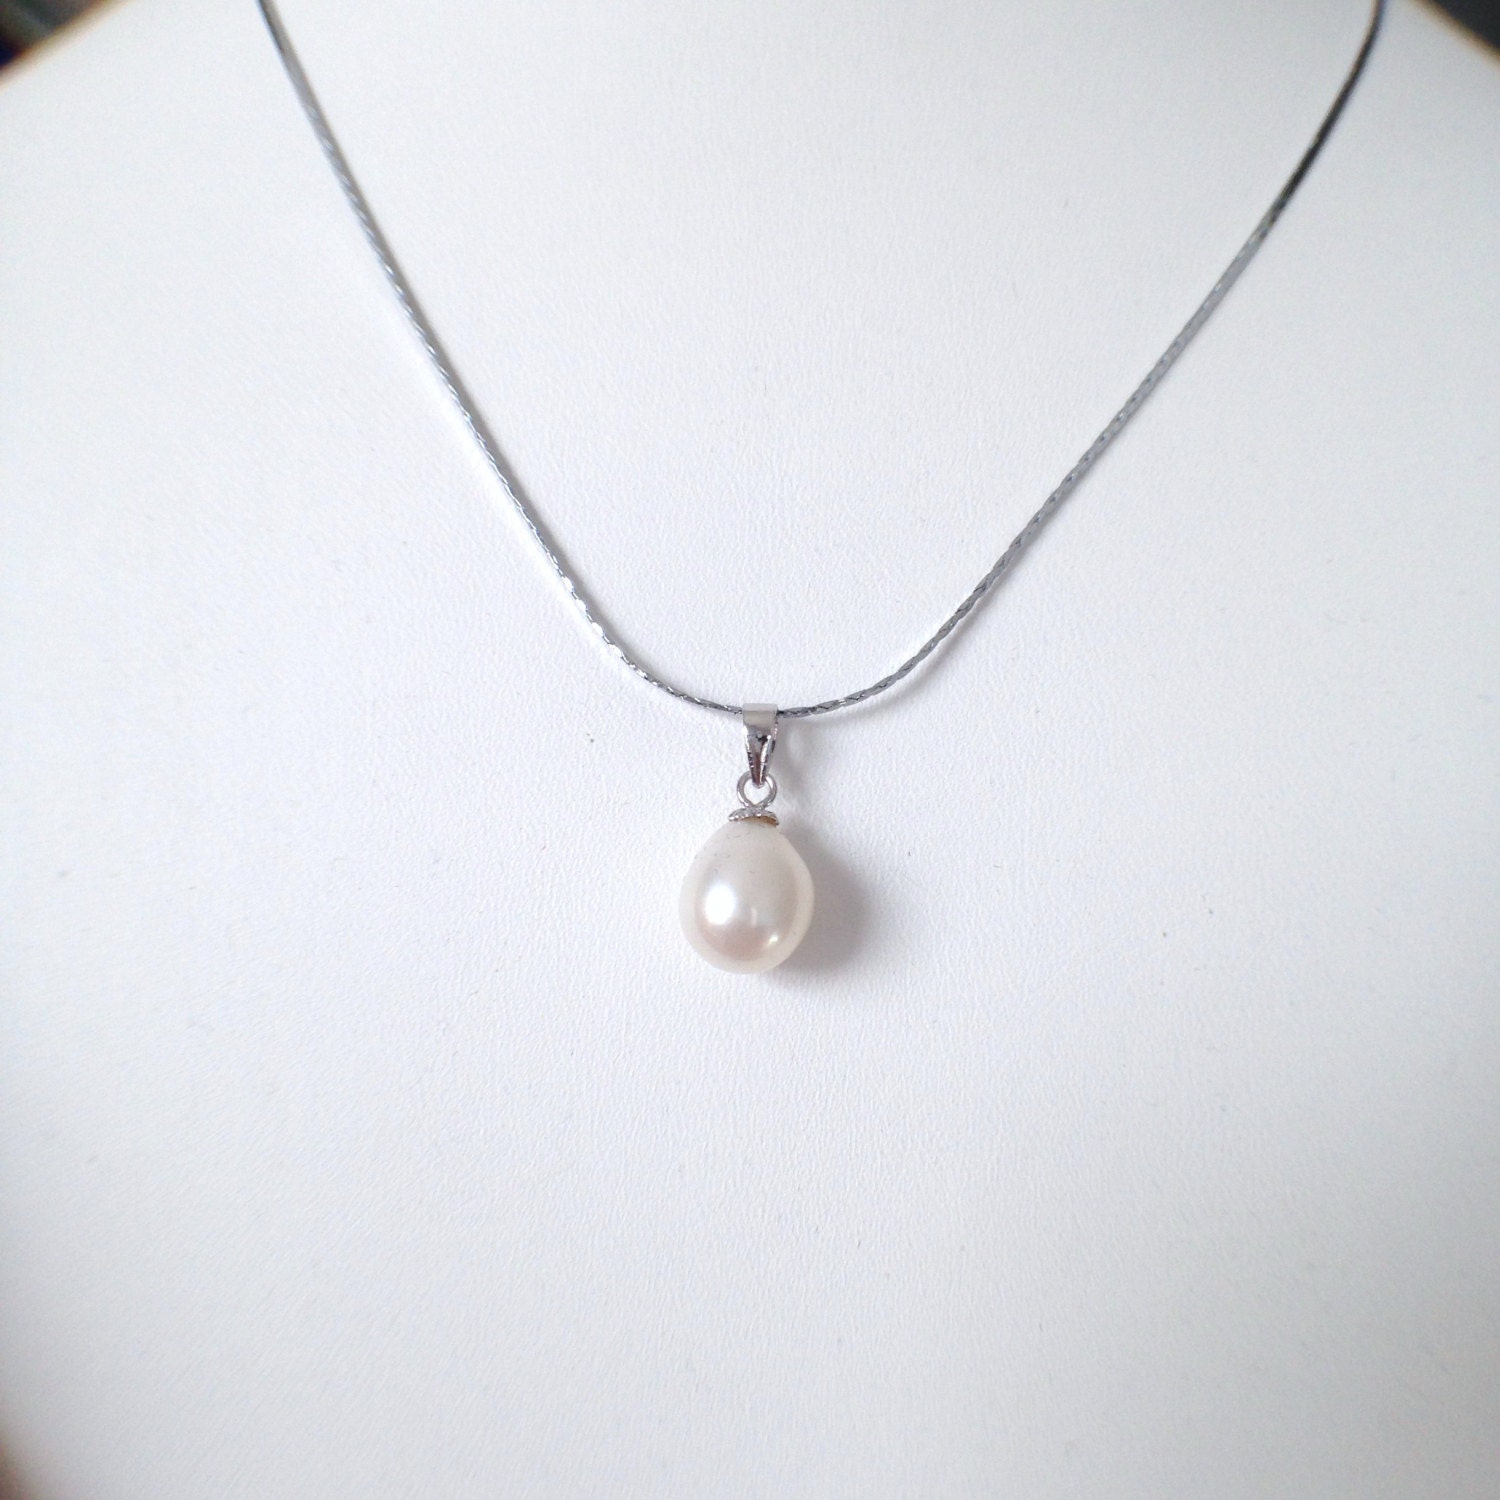 Freshwater Pearl Pendant Necklace 9-10 Mm Whte Pearl Bridal - Etsy